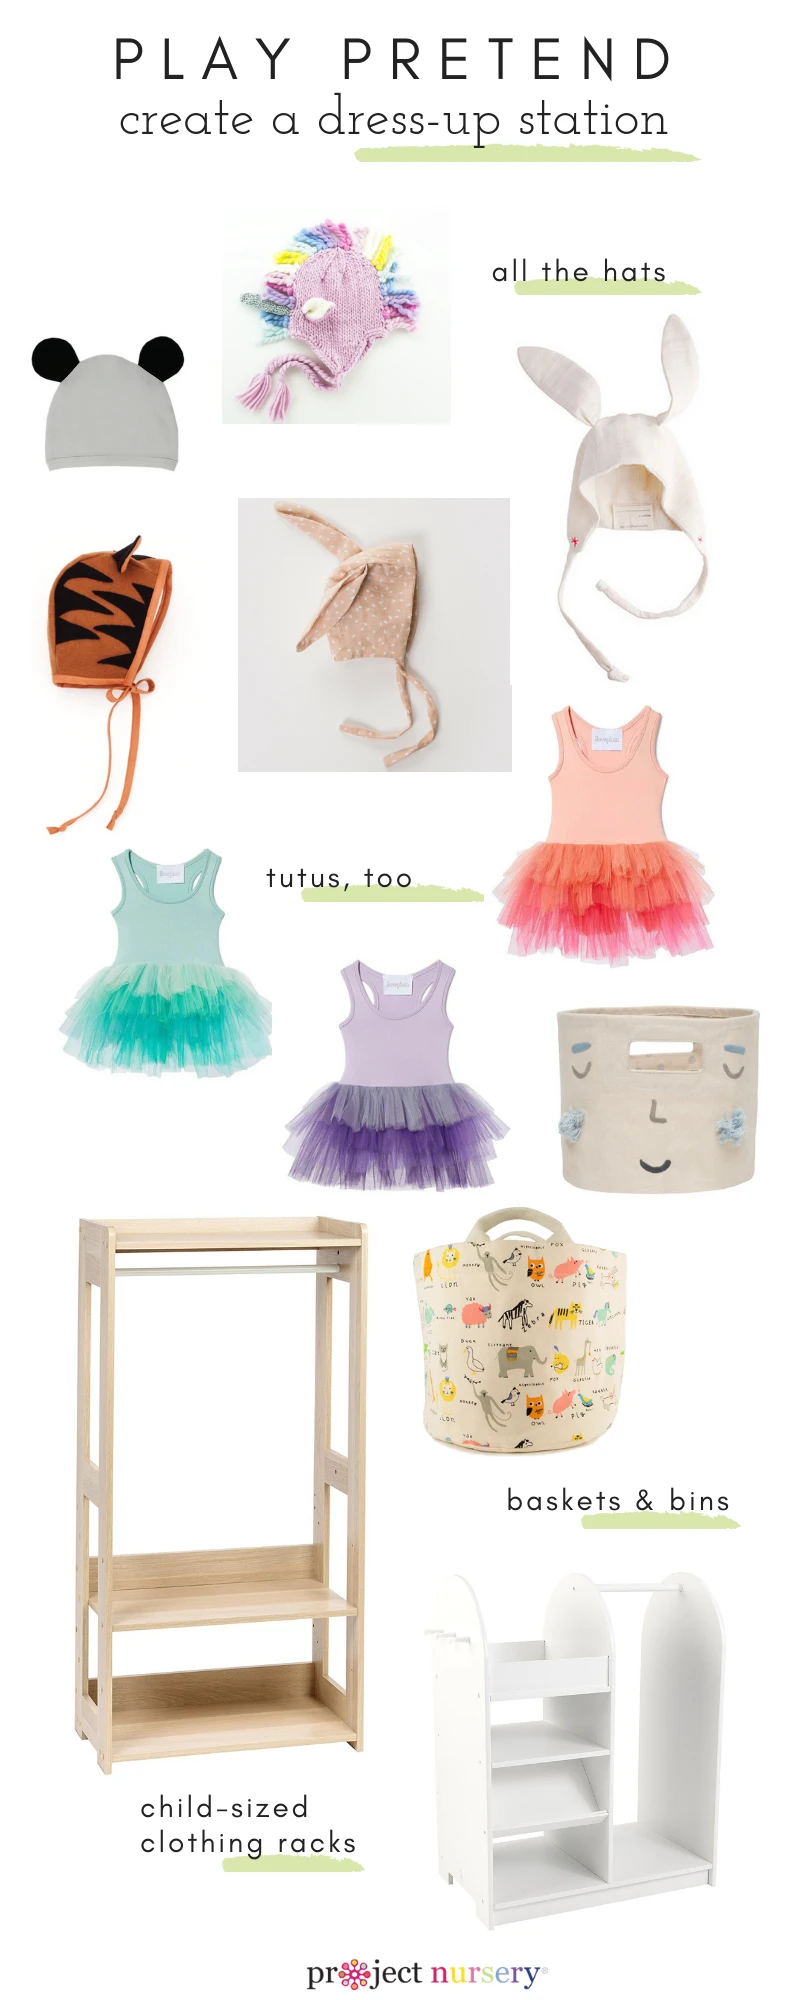 Play Pretend Dress Up Blog Graphic - infographic size 800 x 2000 px (1)